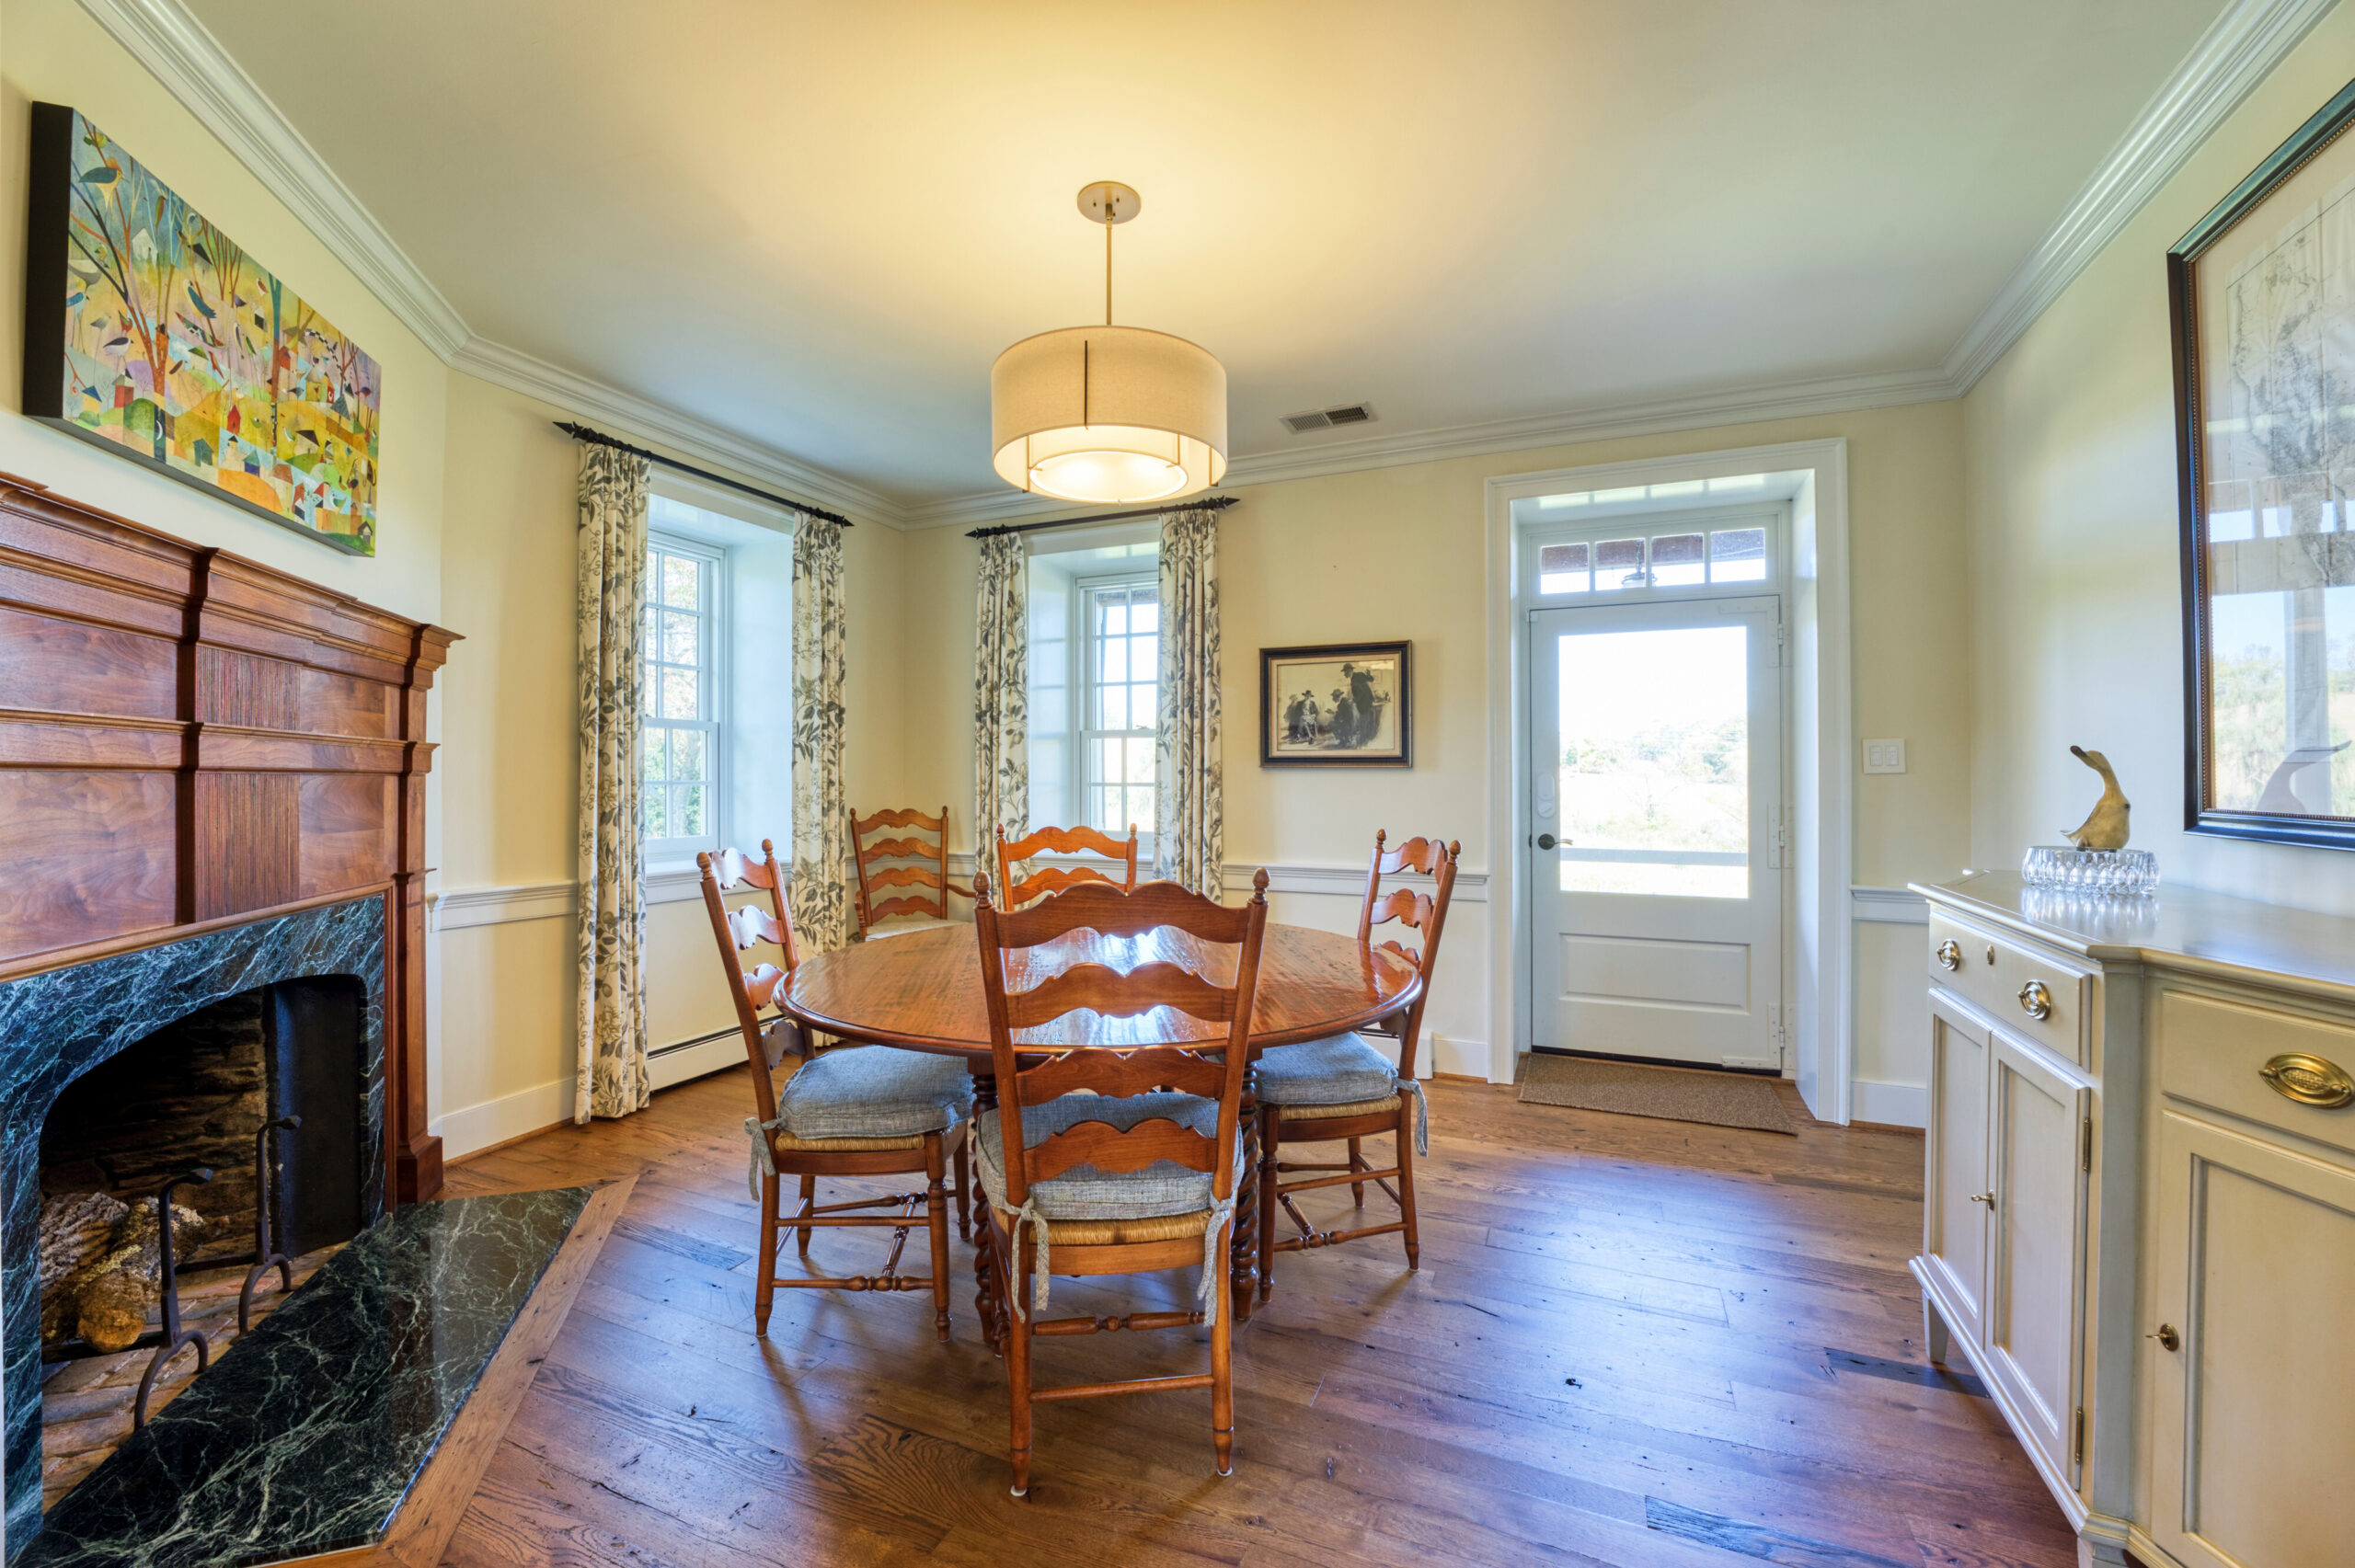 Professional interior photo of main house of Historic Hearthstone Manor: 35428 Appalachian Trail Rd, Round Hill, Virginia - showing formal breakfast room with wooden dining set and fireplace